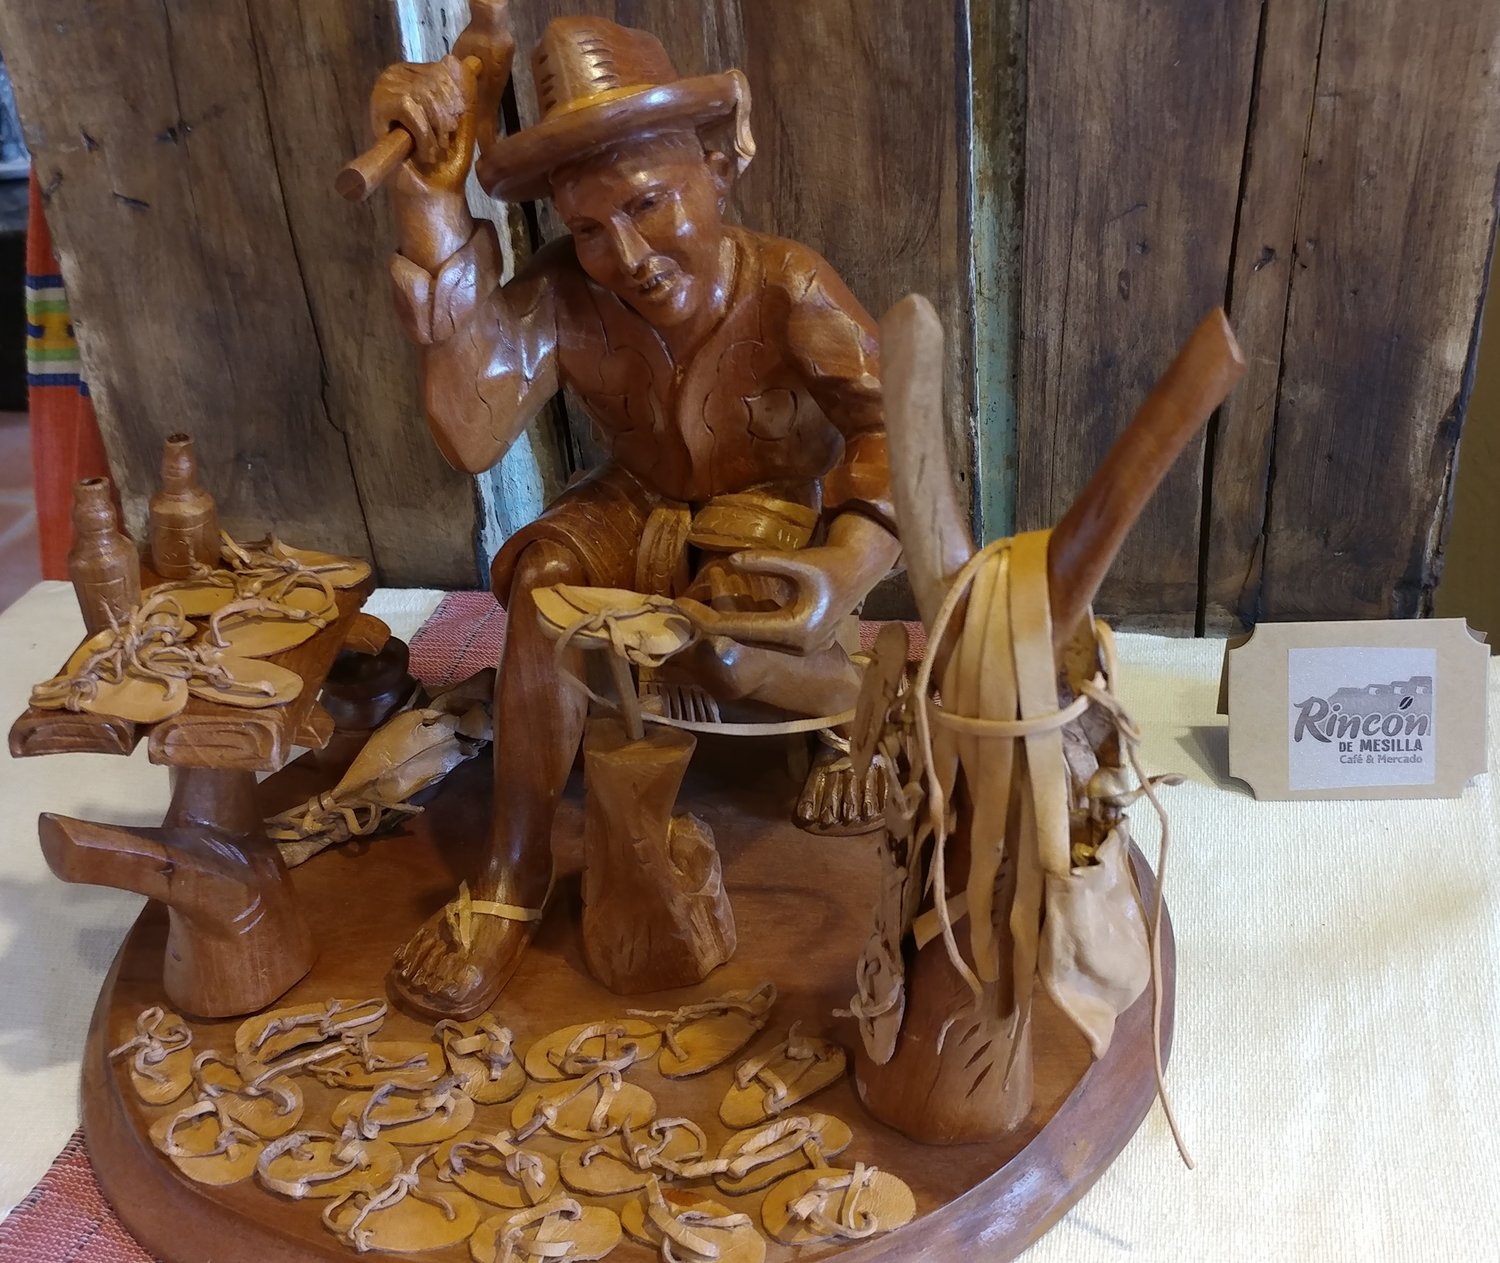 Hand-made woodcrafts are featured at Rincon de Mesilla.